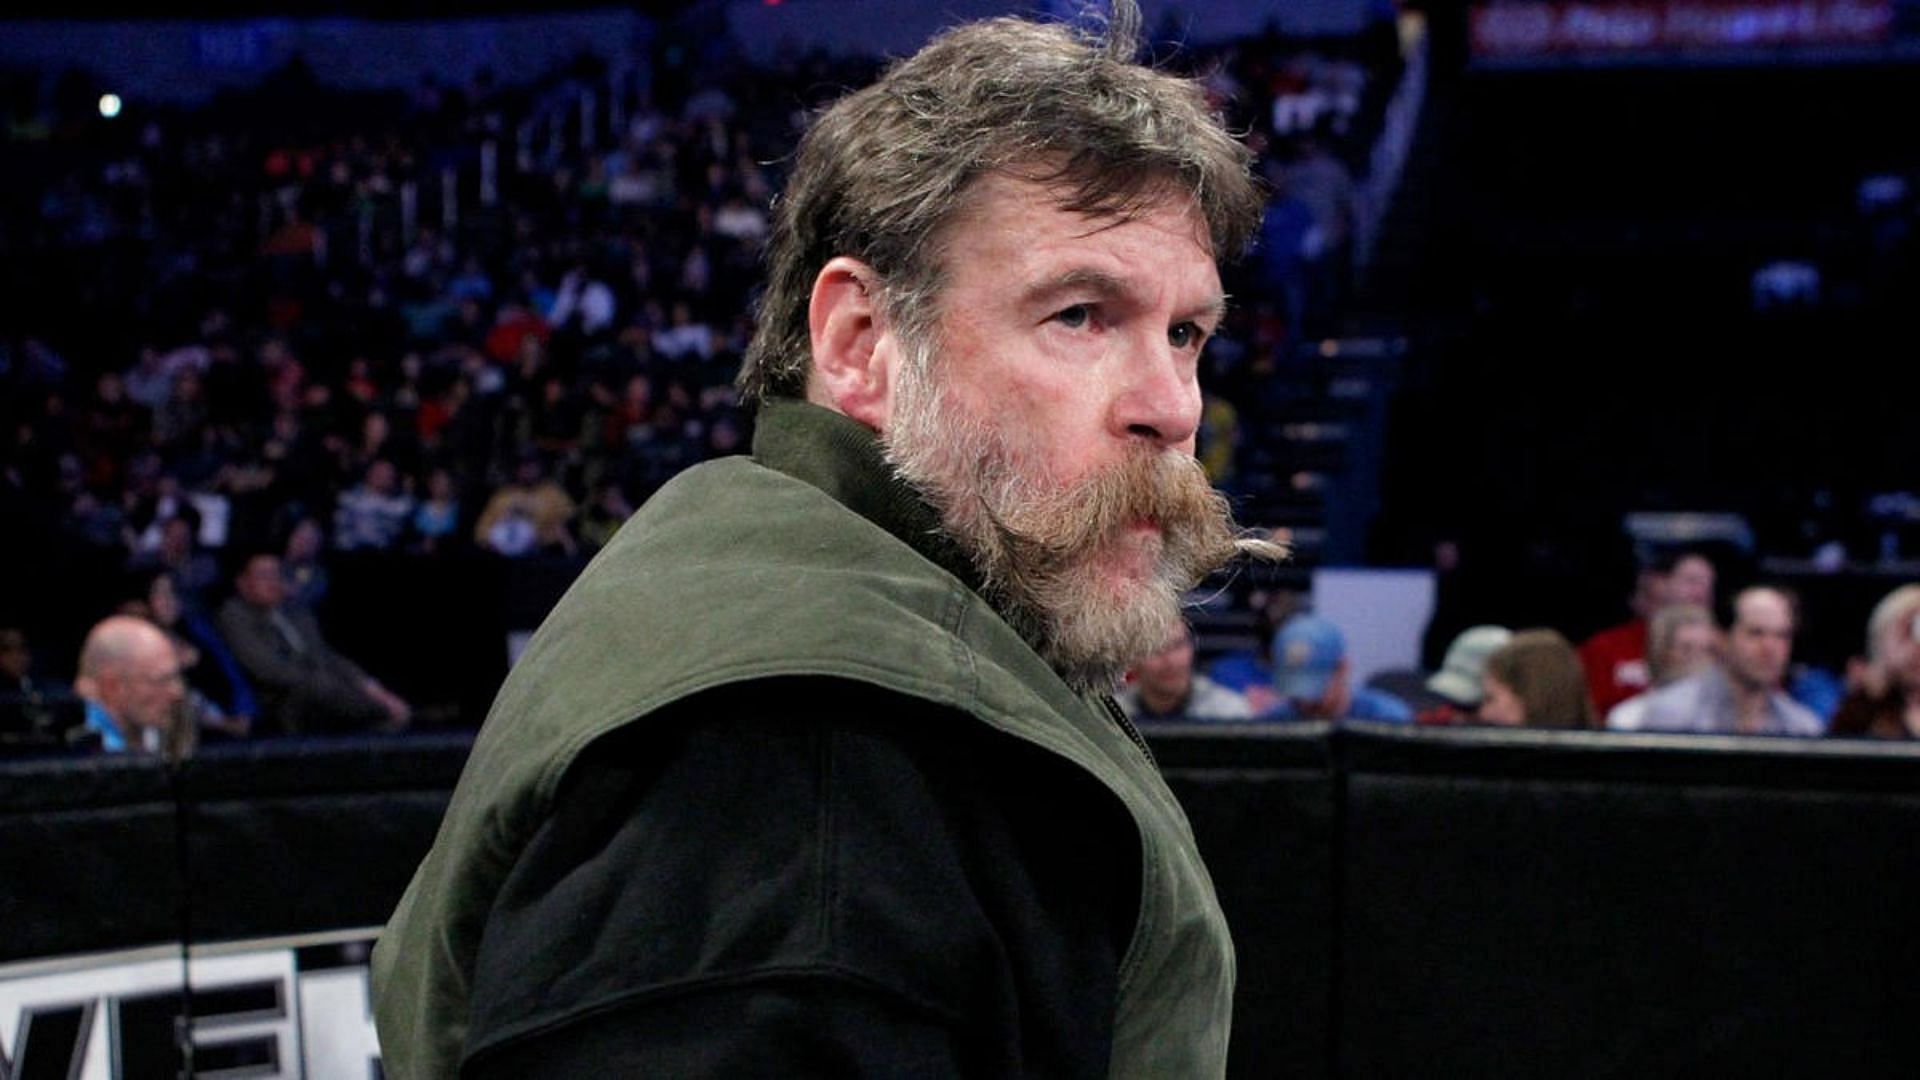 Dutch Mantell performed as Zeb Colter in WWE